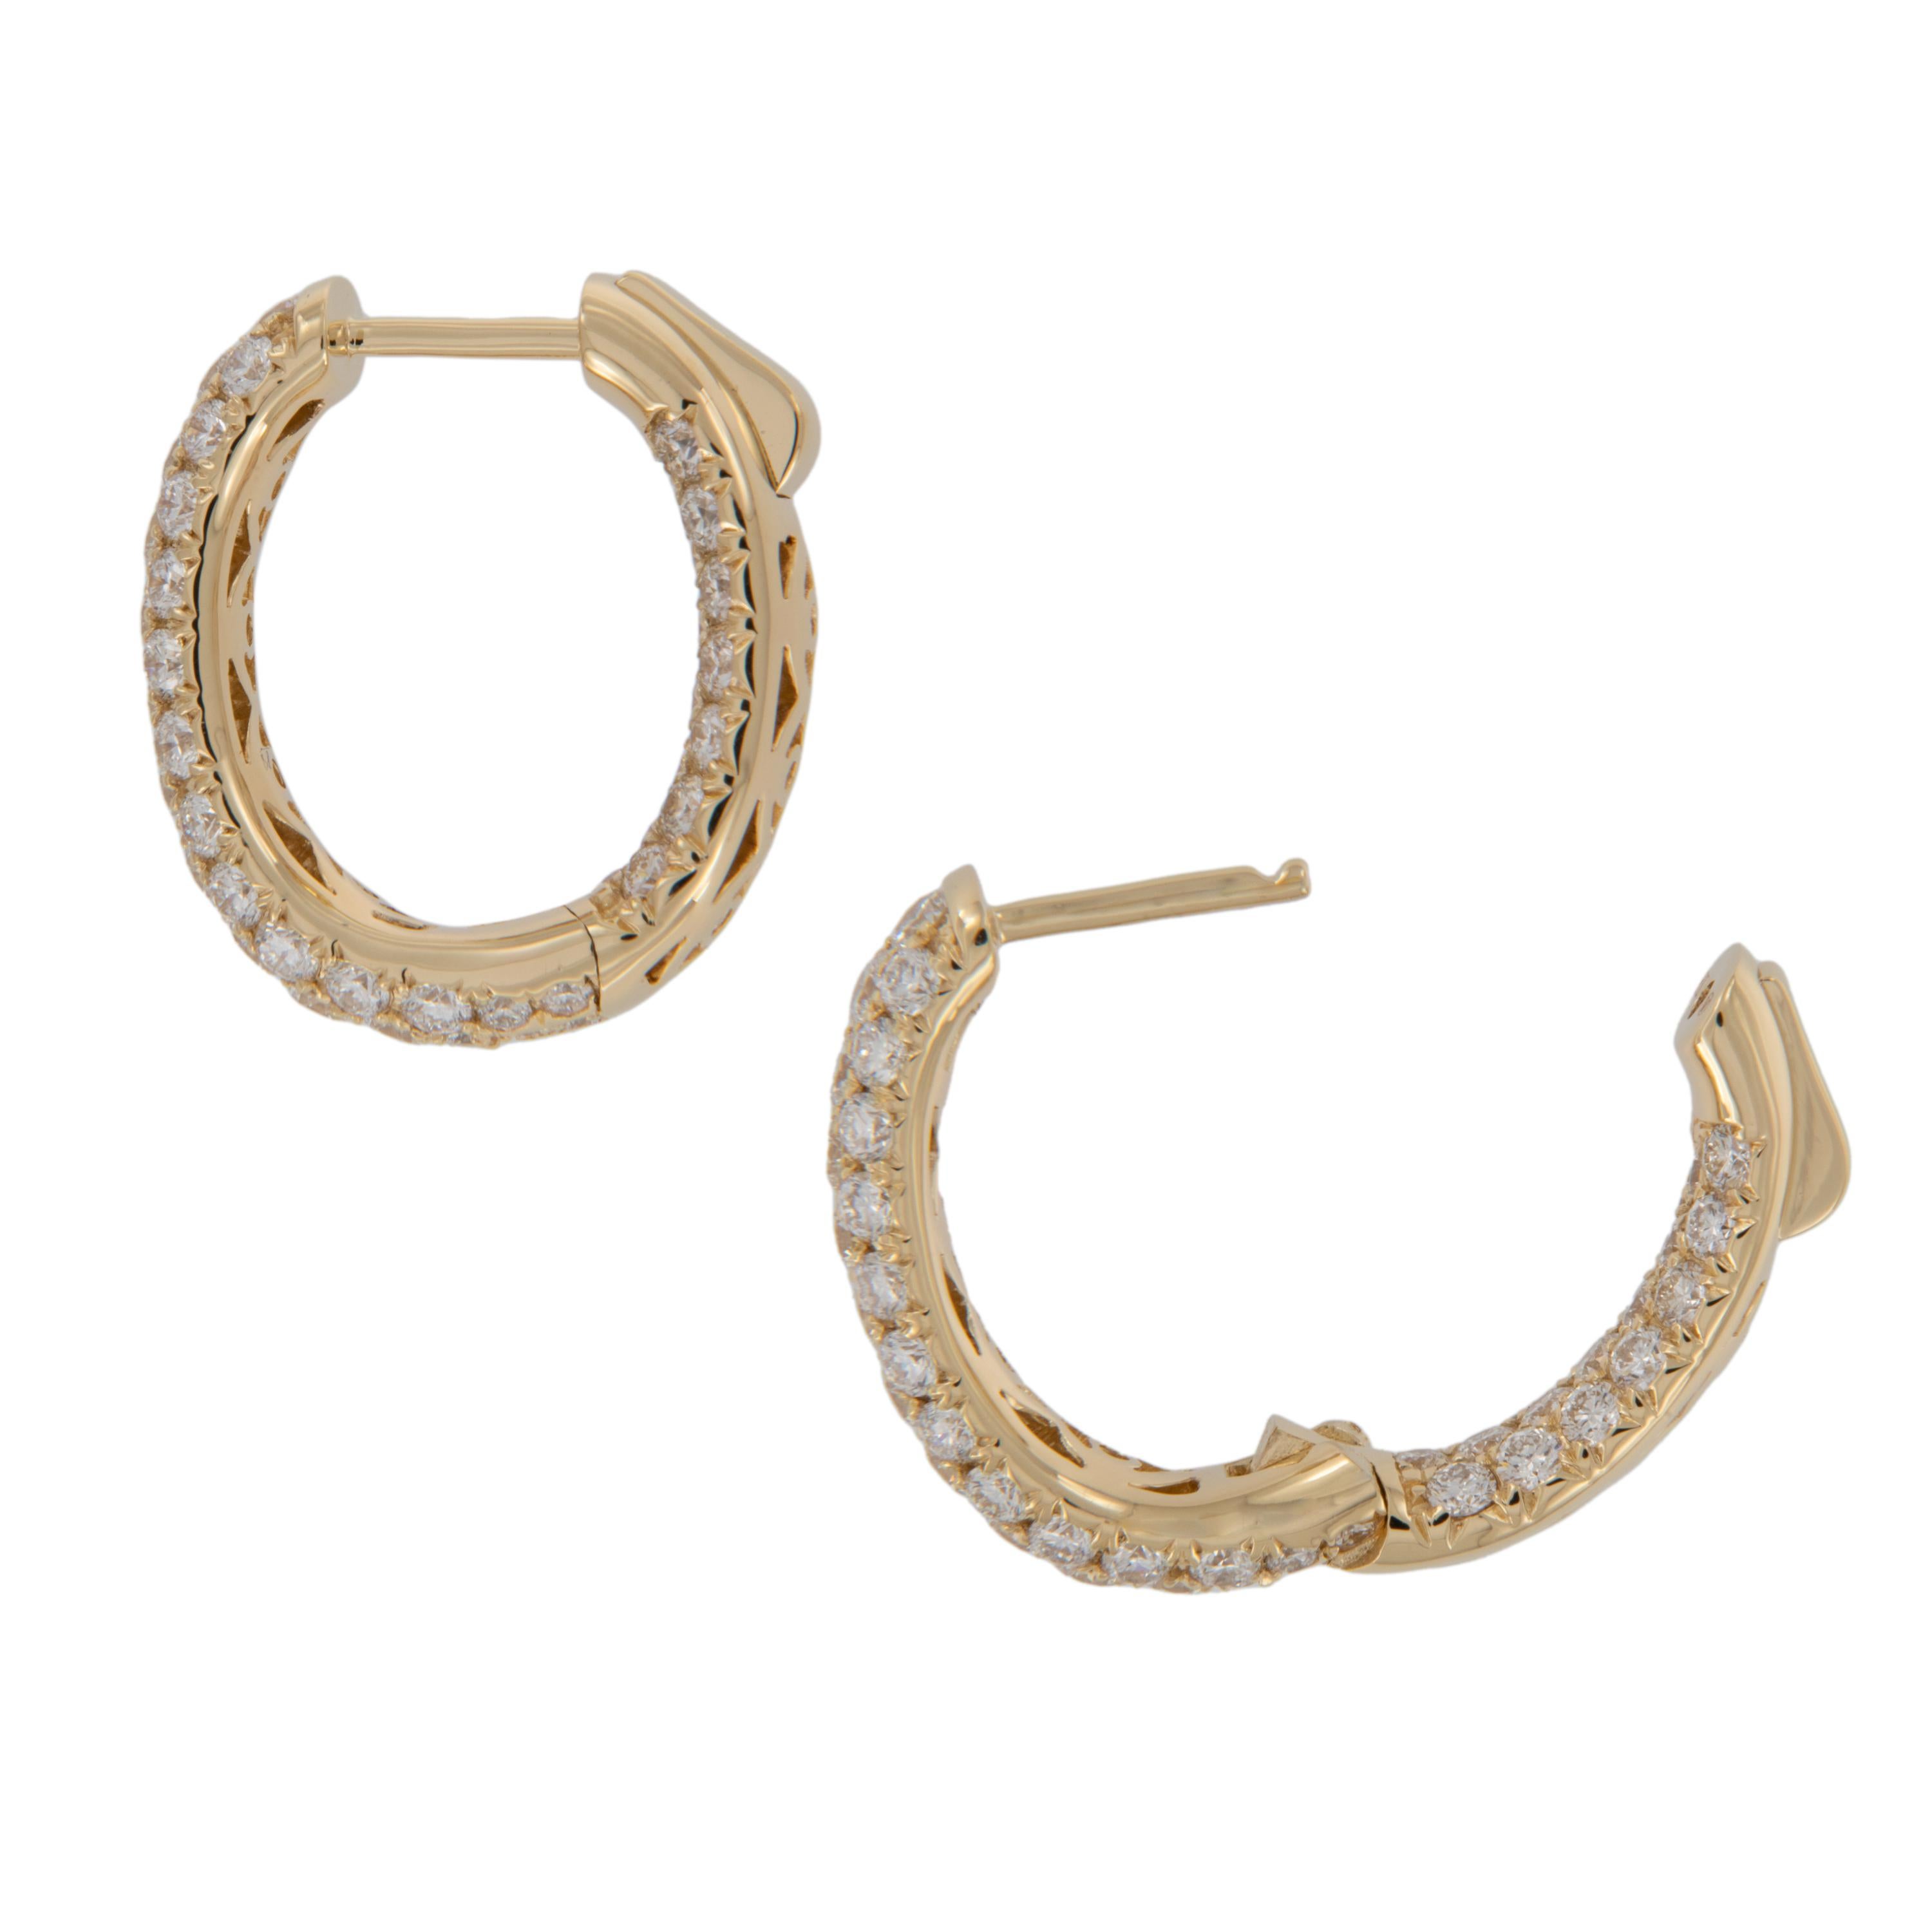 Made from royal 18 karat yellow gold, these pave' set (literally meaning paved with diamonds) inside outside diamond hoops with 122 RBC diamonds = 3.05 Cttw are meant to turn heads with the diamonds glimmering from all directions! Elegant oval